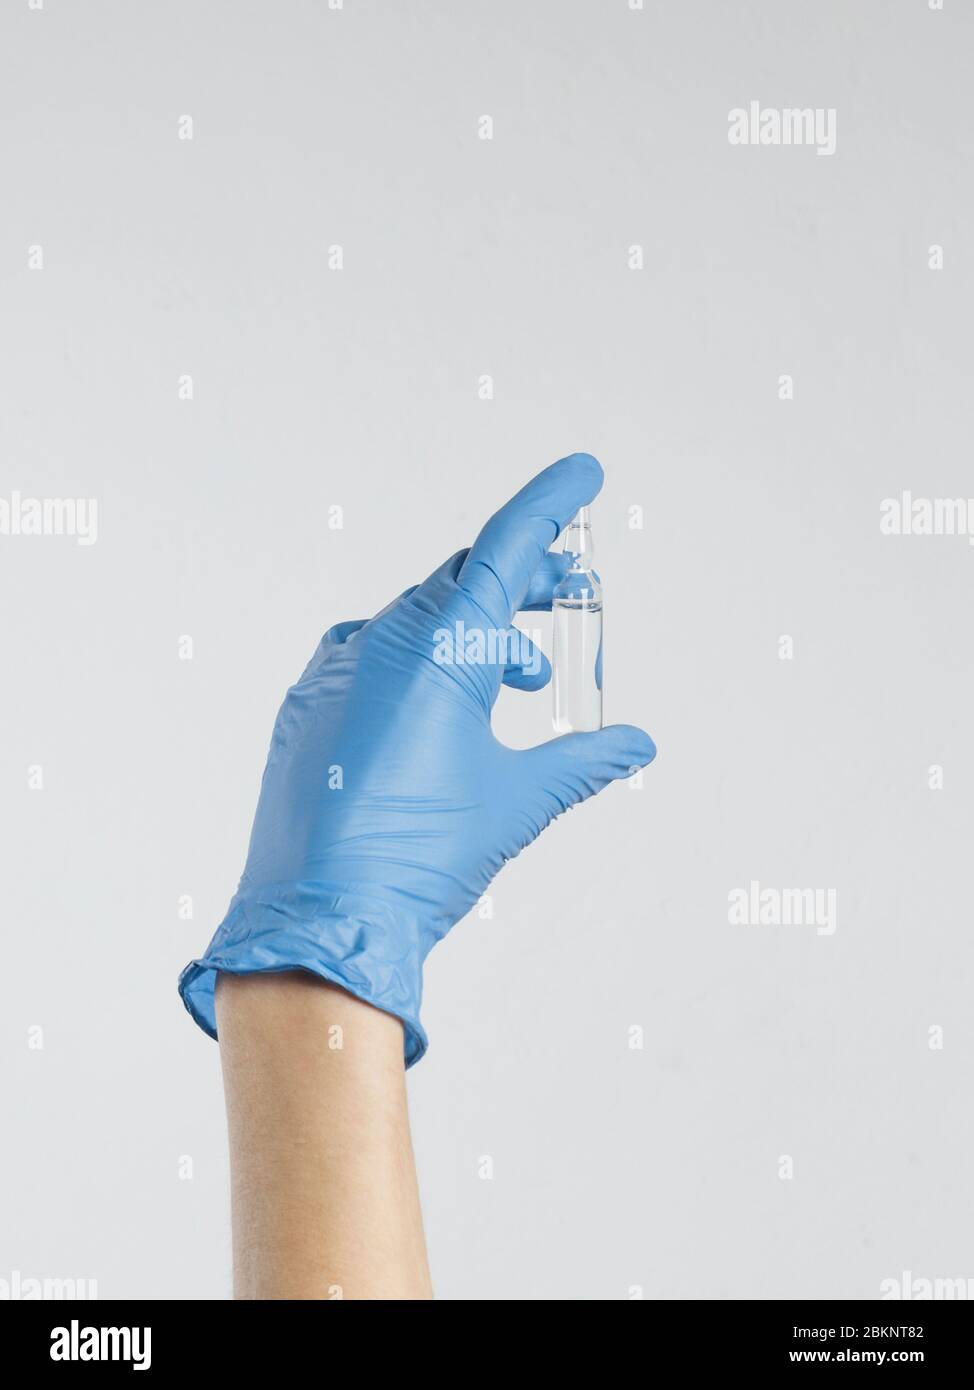 Vaccination Coronavirus Covid-19 Concept. Hand in medical glove holds ampoule with vaccine Stock Photo